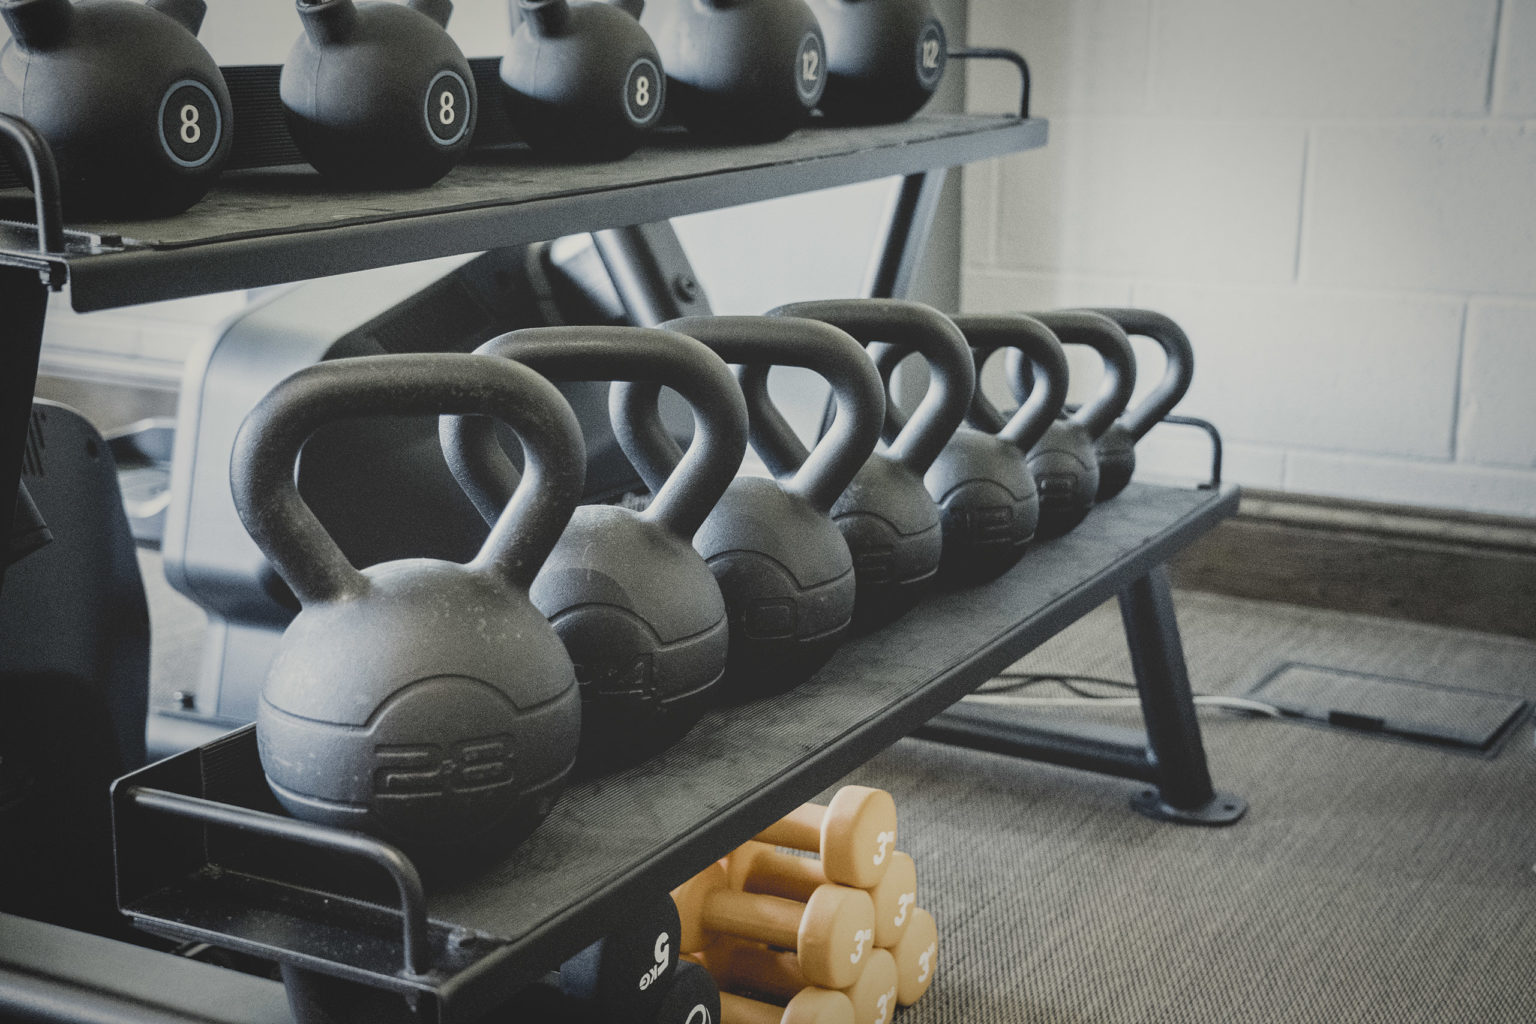 Gym kettle bell weights at Swinton Country Club and Spa near Harrogate